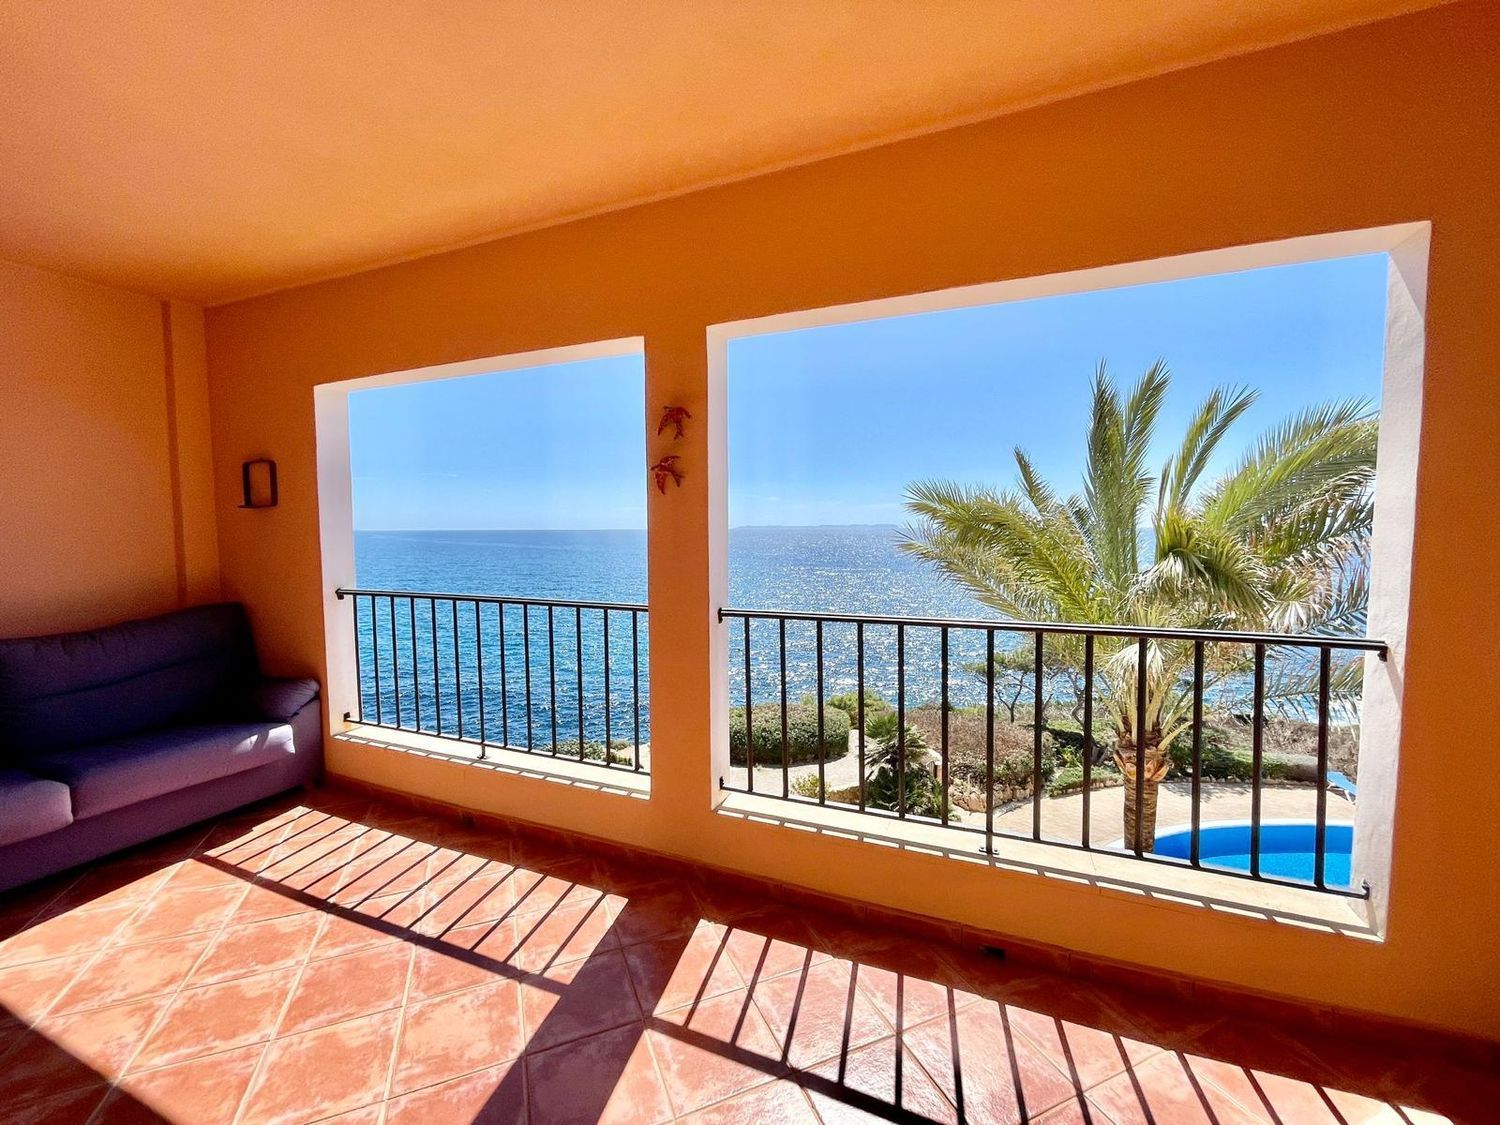 Flat for sale in first sea line in Murillo, in Llucmajor